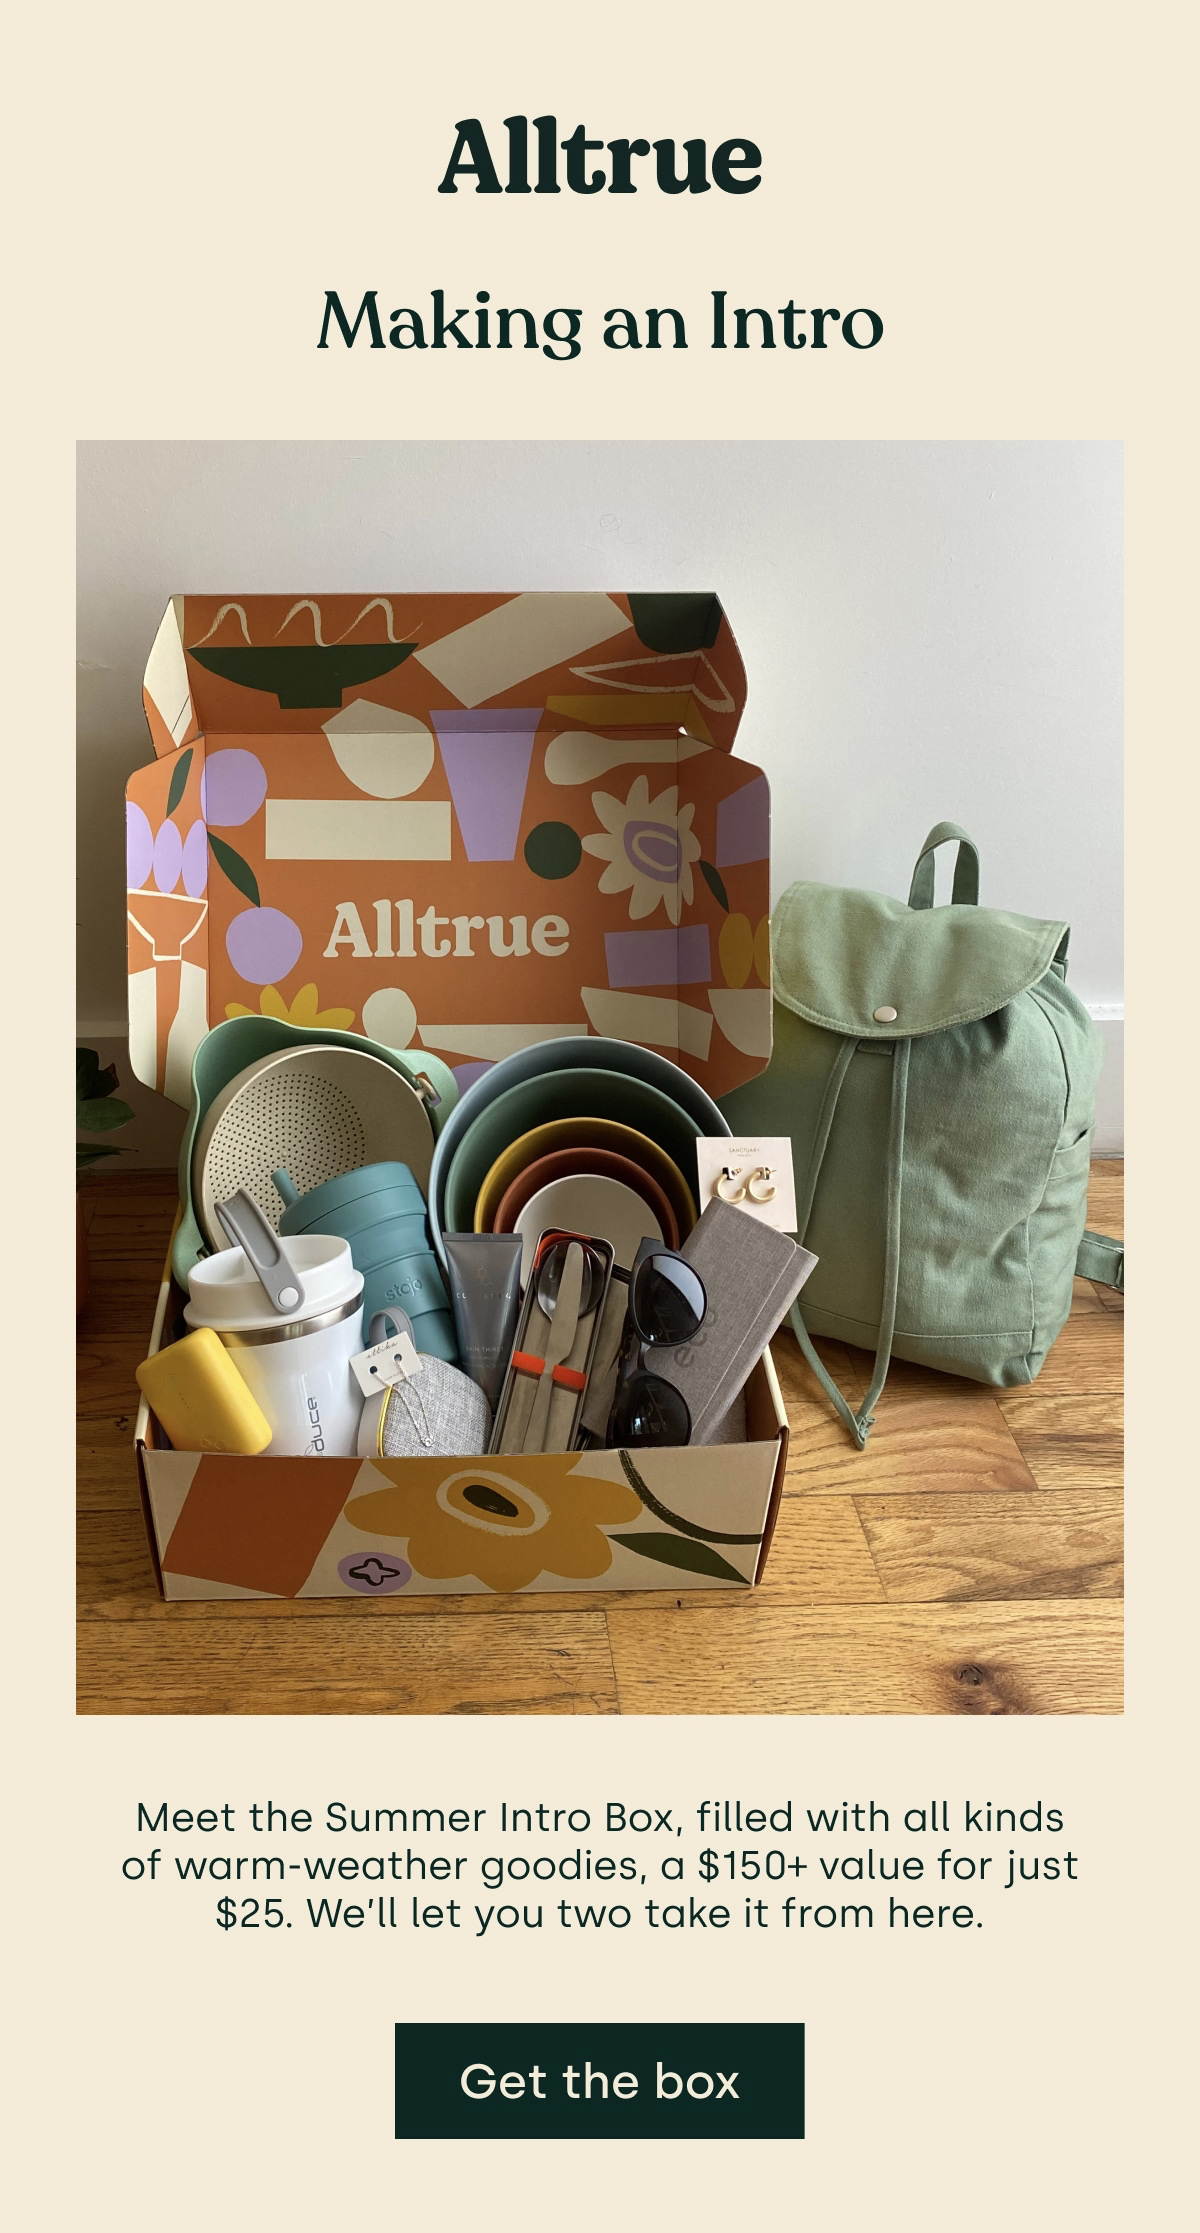 Alltrue 25 Summer 2021 Intro Box Full Spoilers + FREE With Annual